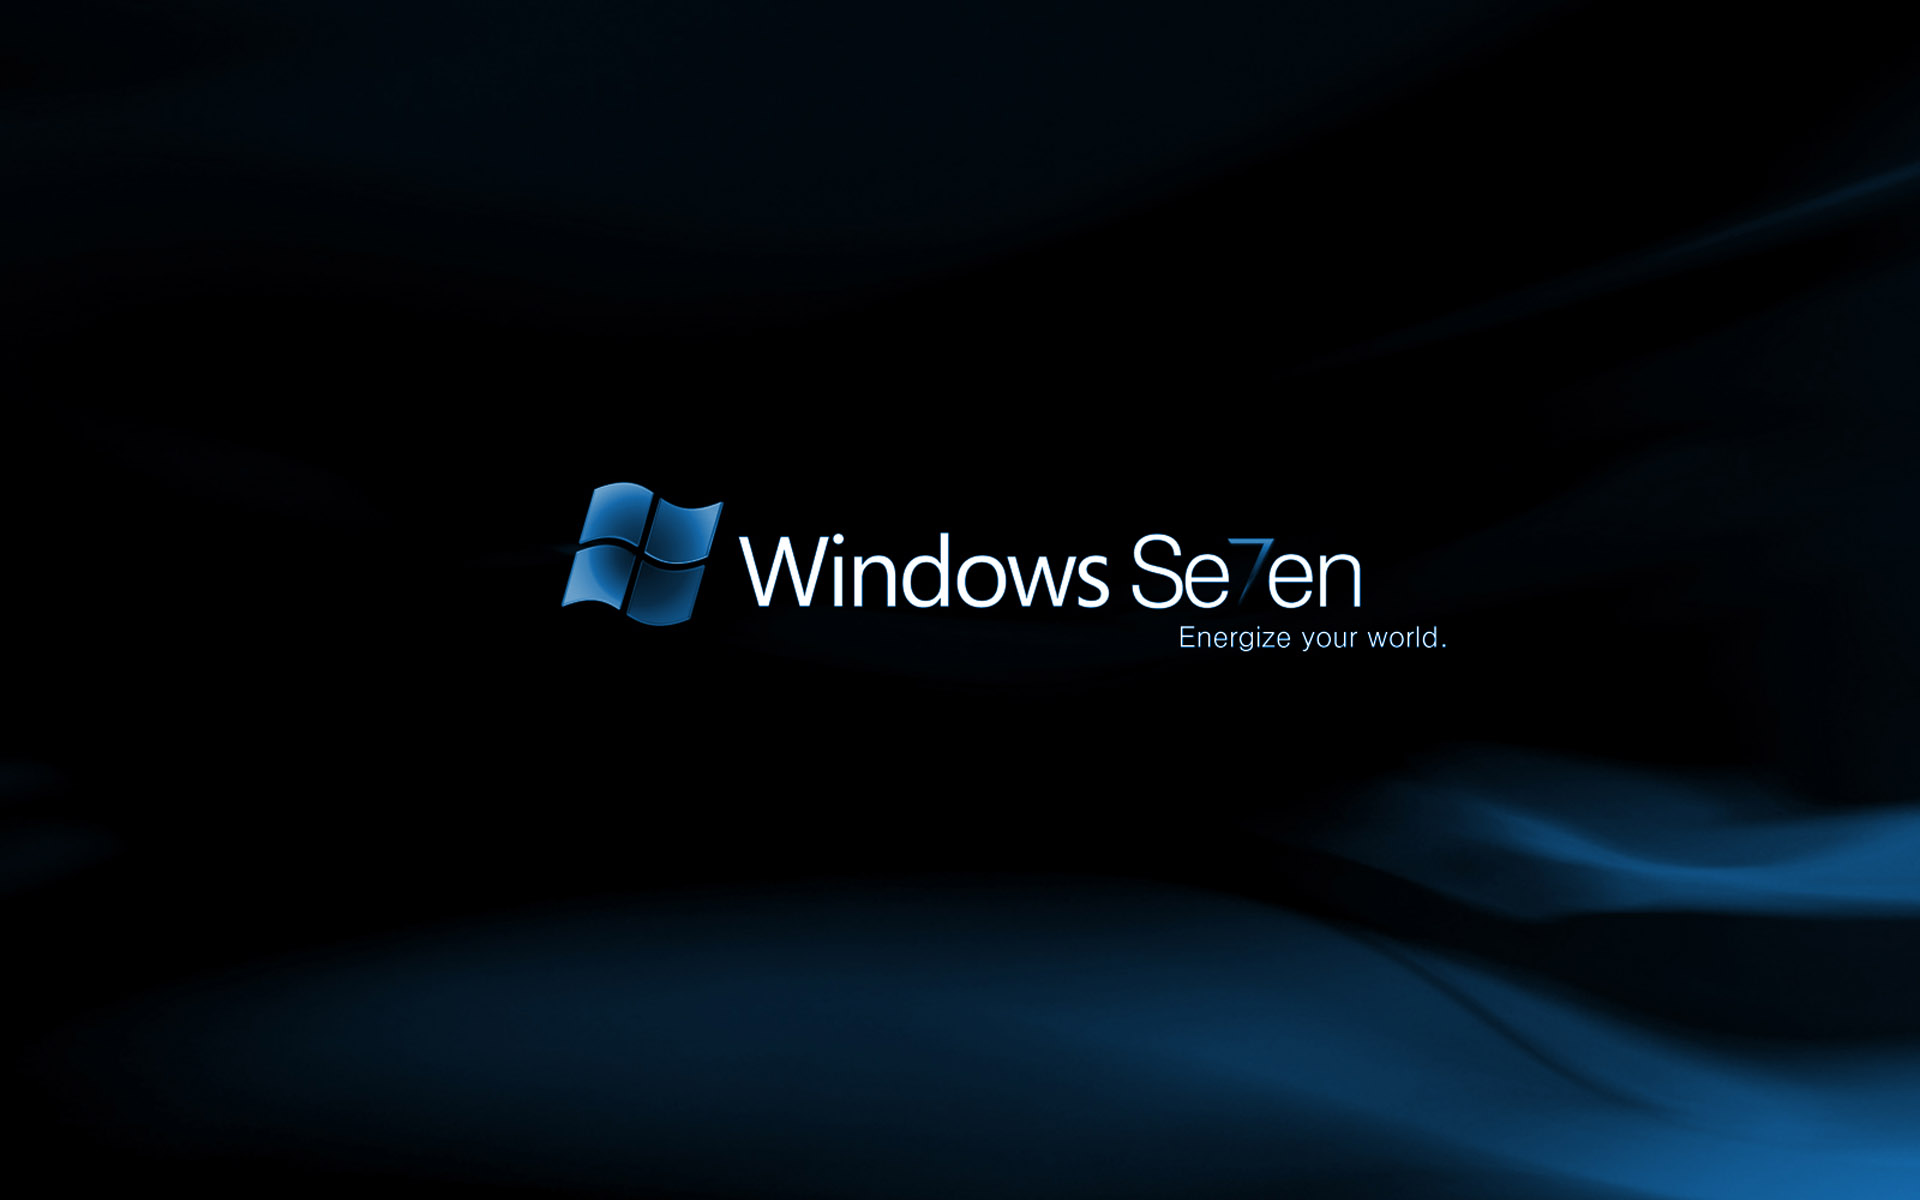 Cool windows 7 free wallpaper is a great wallpaper for your computer